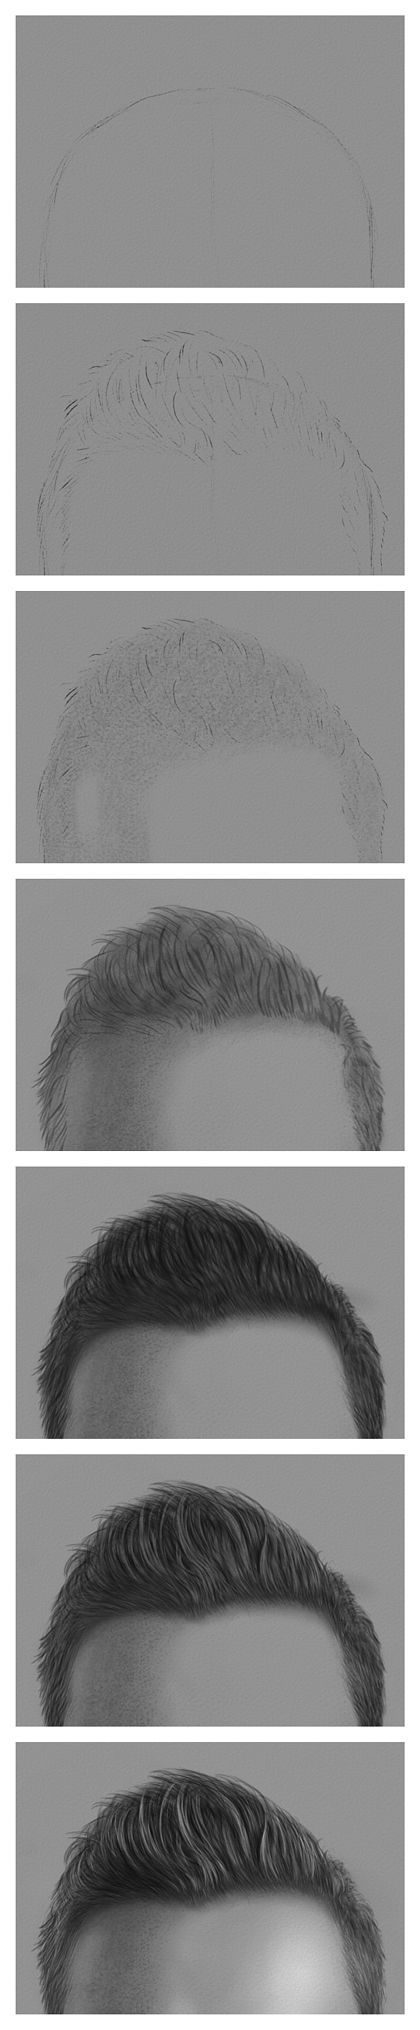 Charcoal Portraits How To Draw Hair